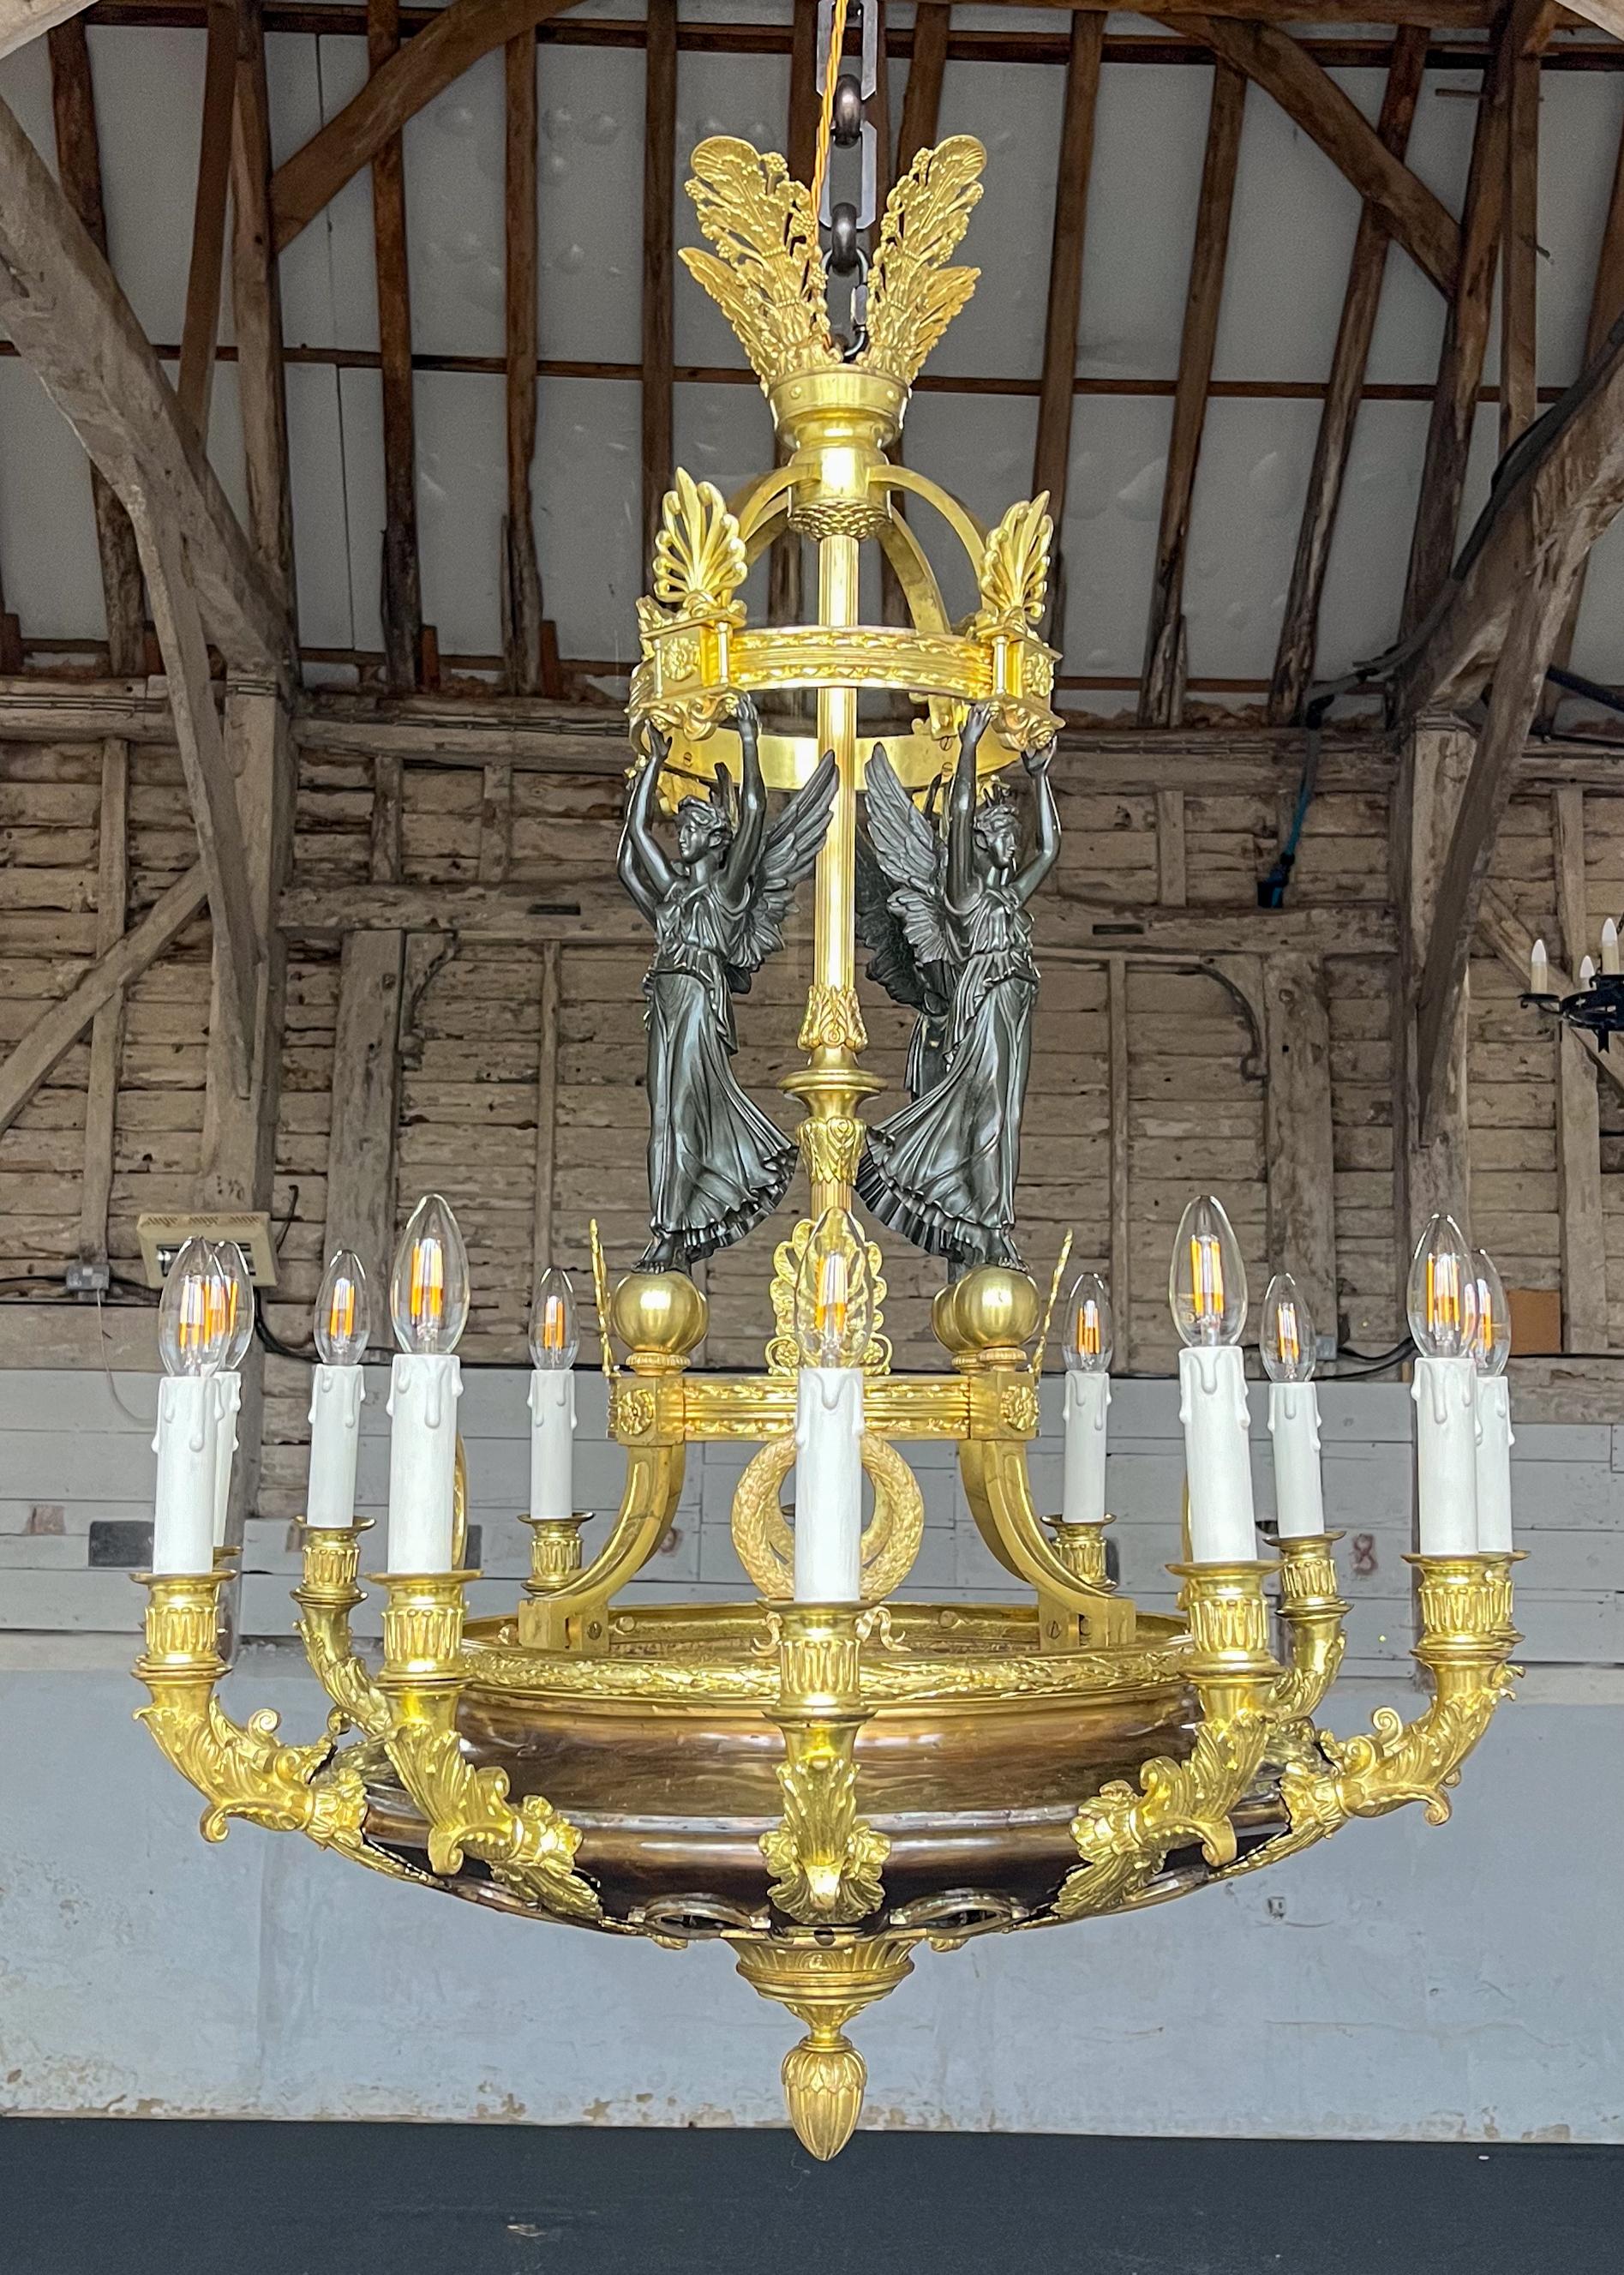 An impressive gilt and patinated bronze French Empire chandelier with twelve lights, attributed to Pierre-Philippe Thomire (1751–1843). Winged Victory figures wearing classical robes stand atop guilt spheres. 

Pierre-Philippe Thomire was a French